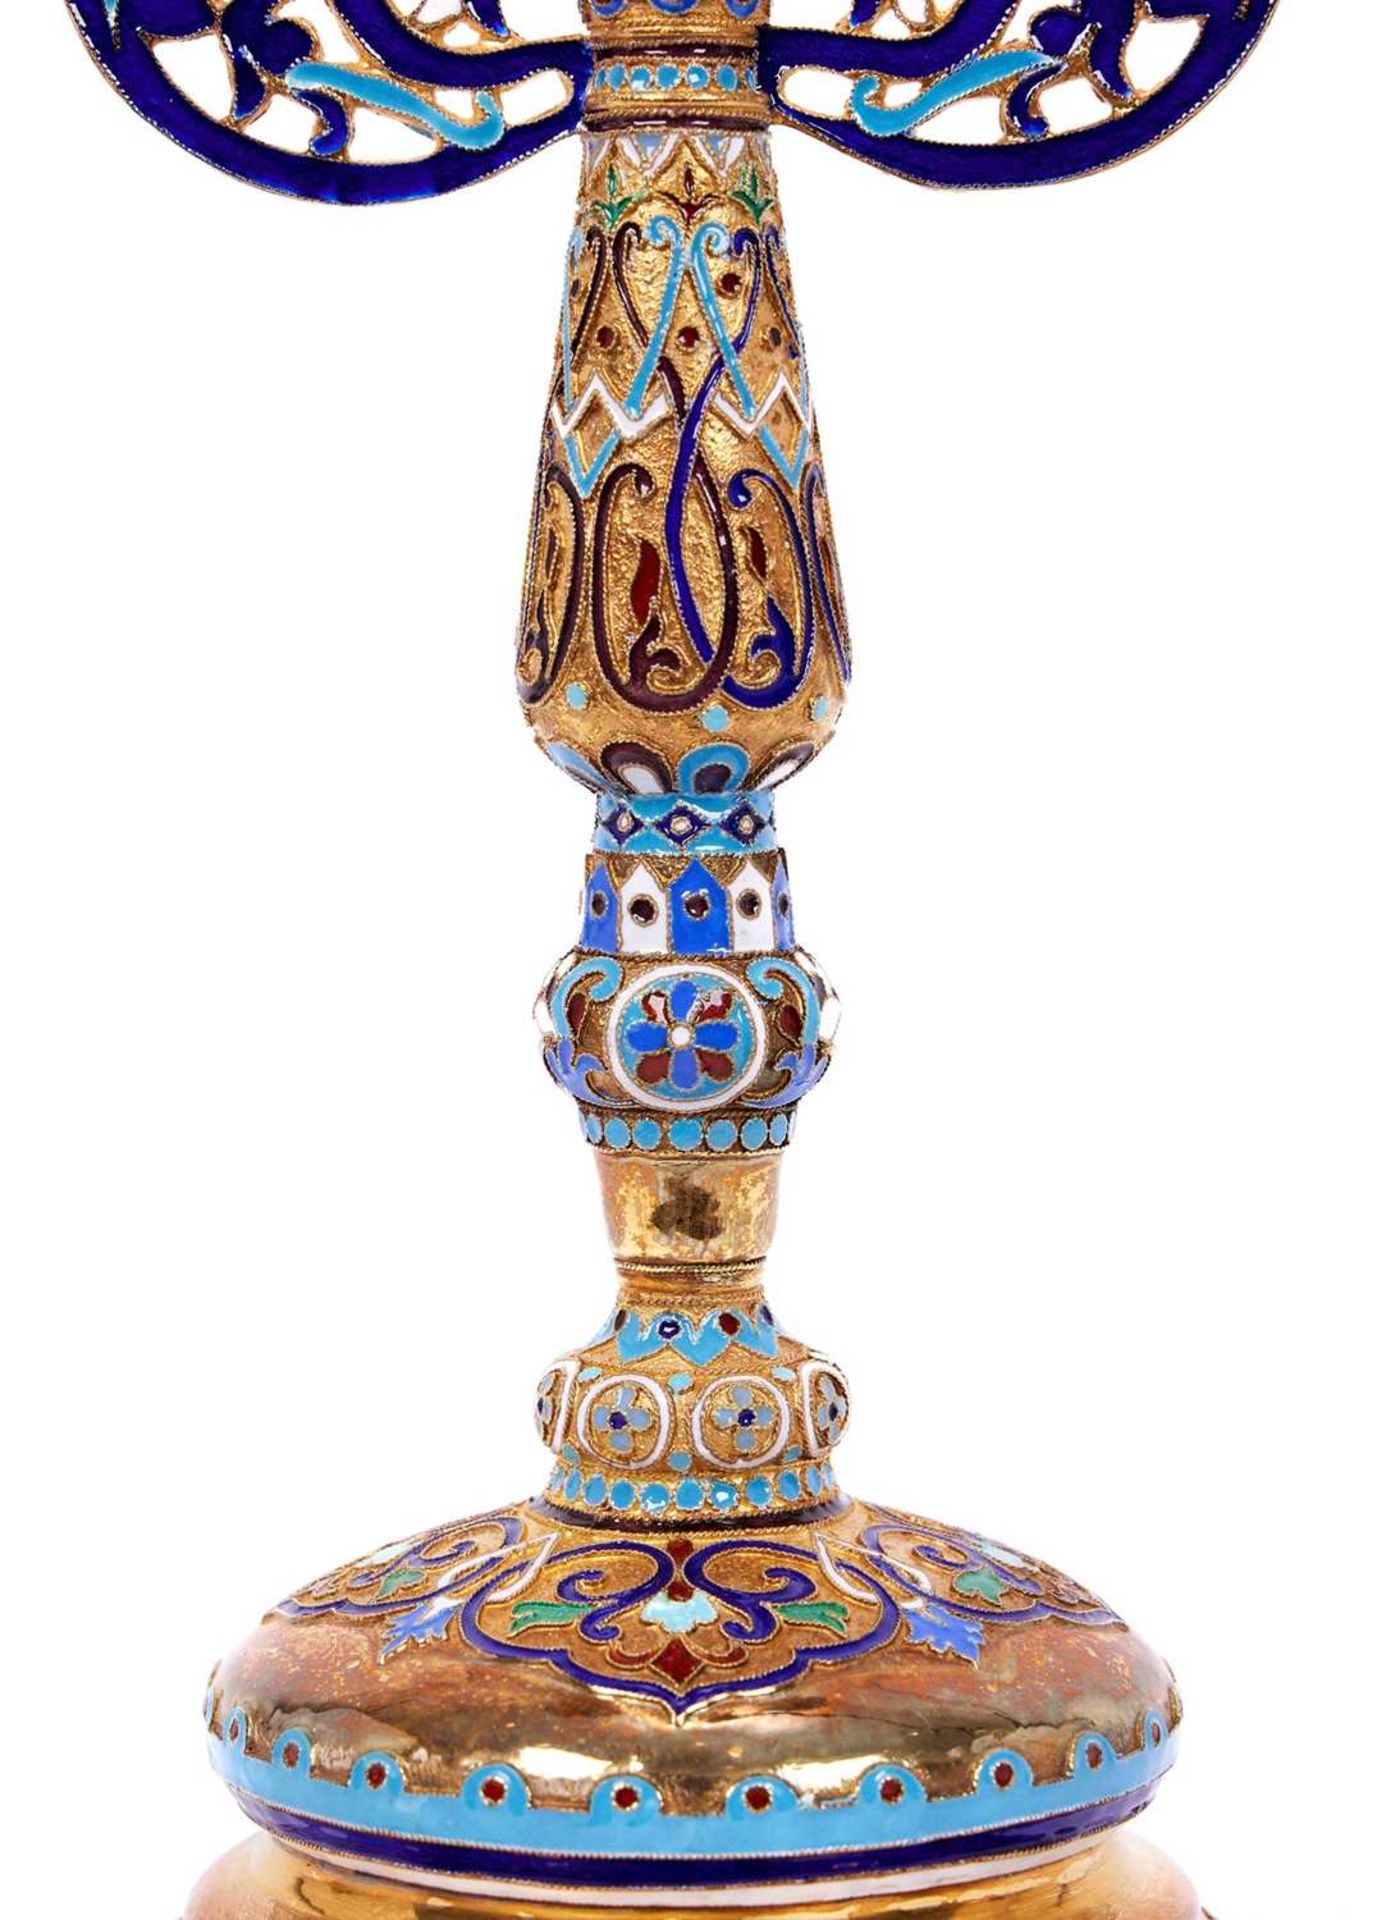 A PAIR OF SILVER GILT AND CHAMPLEVE ENAMEL CANDELABRA IN THE RUSSIAN STYLE - Image 4 of 4